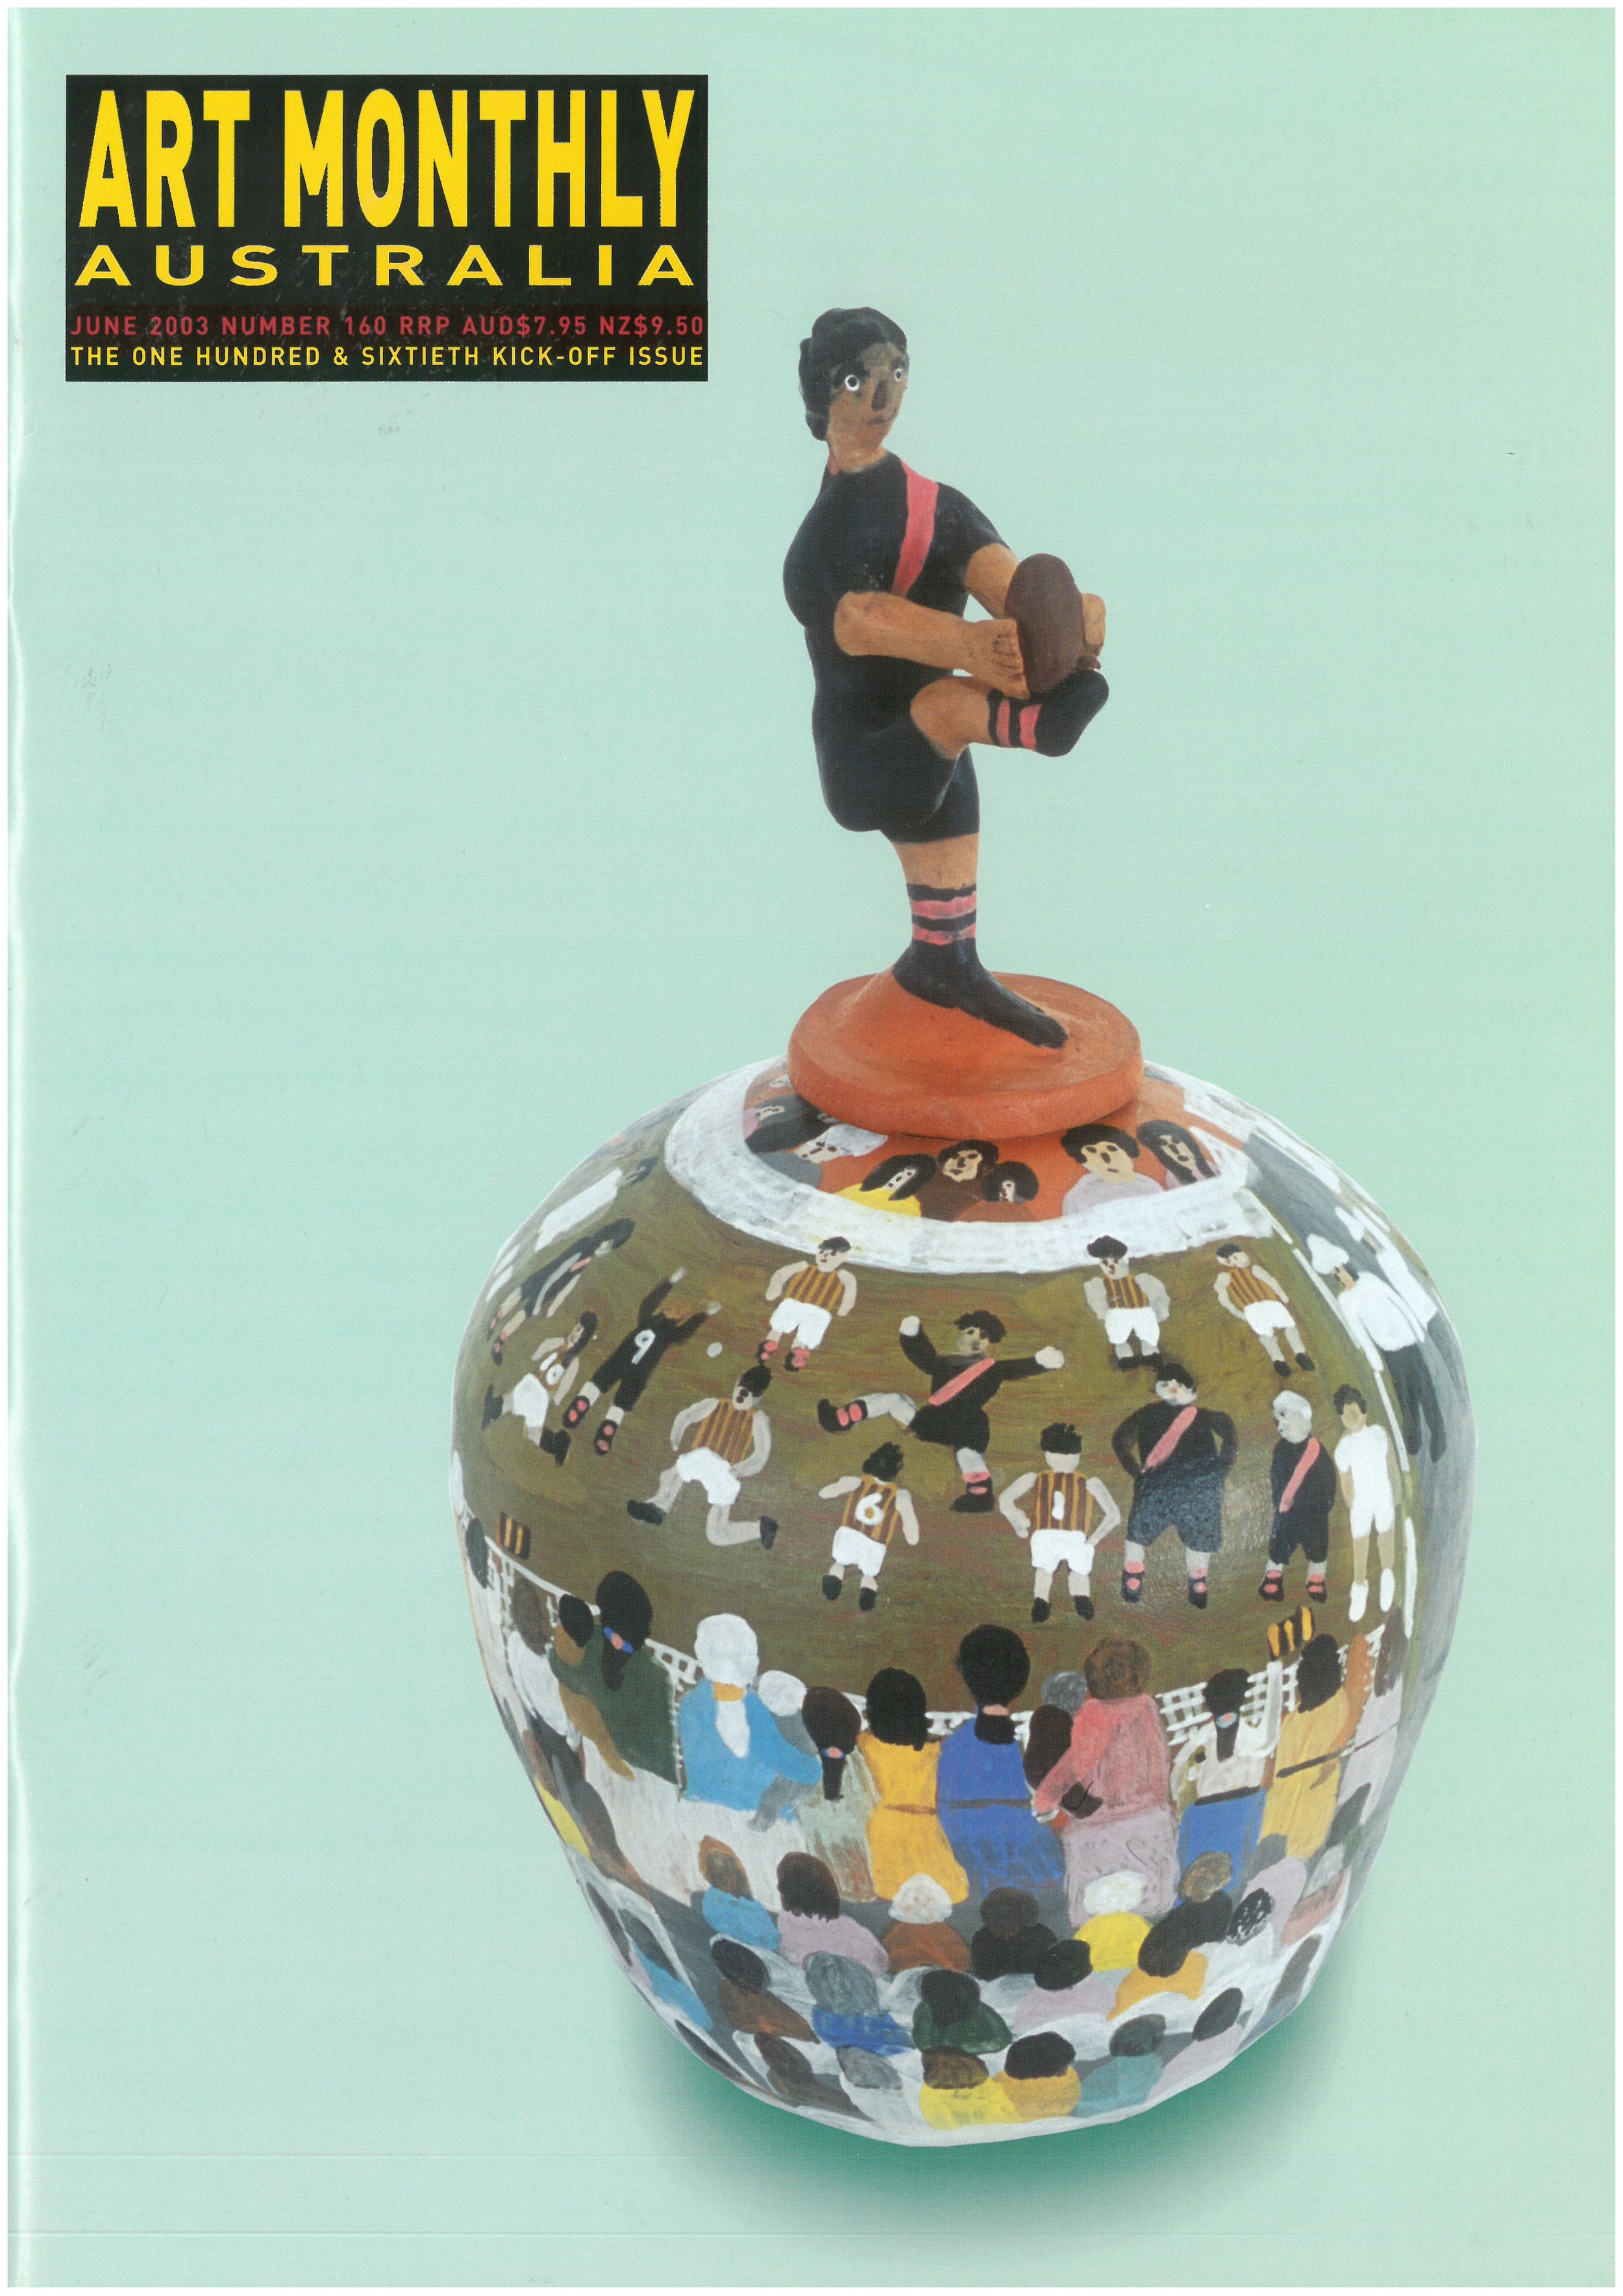  Issue 160 June 2003